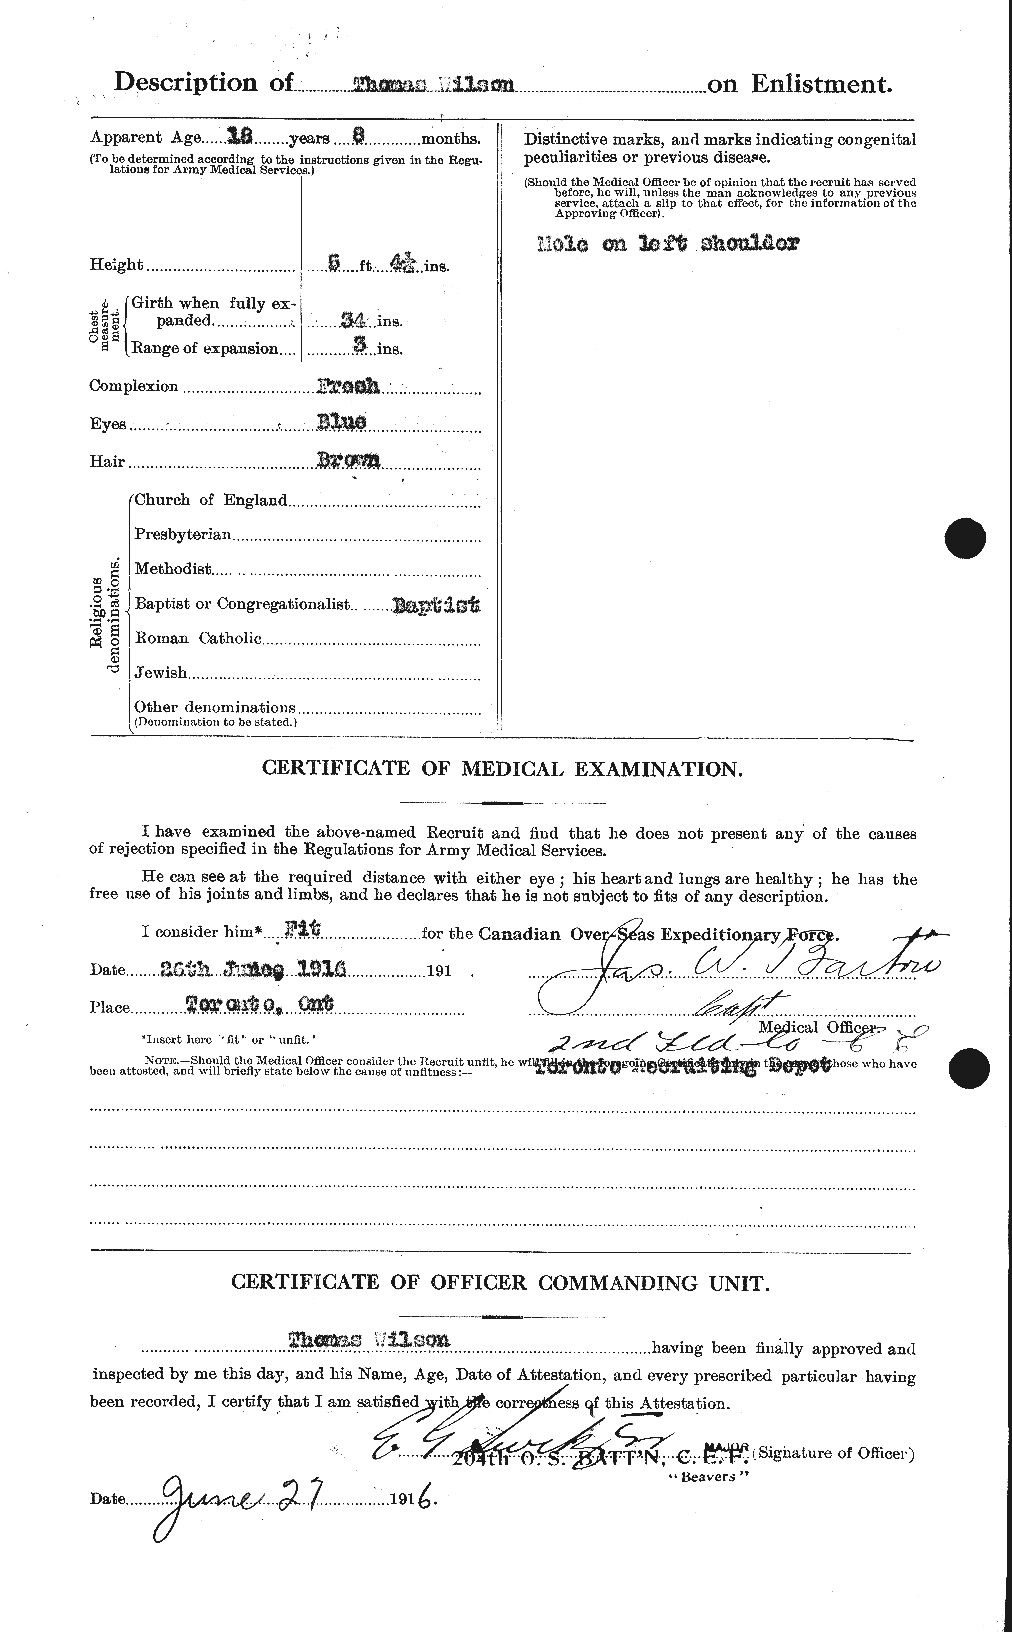 Personnel Records of the First World War - CEF 681179b